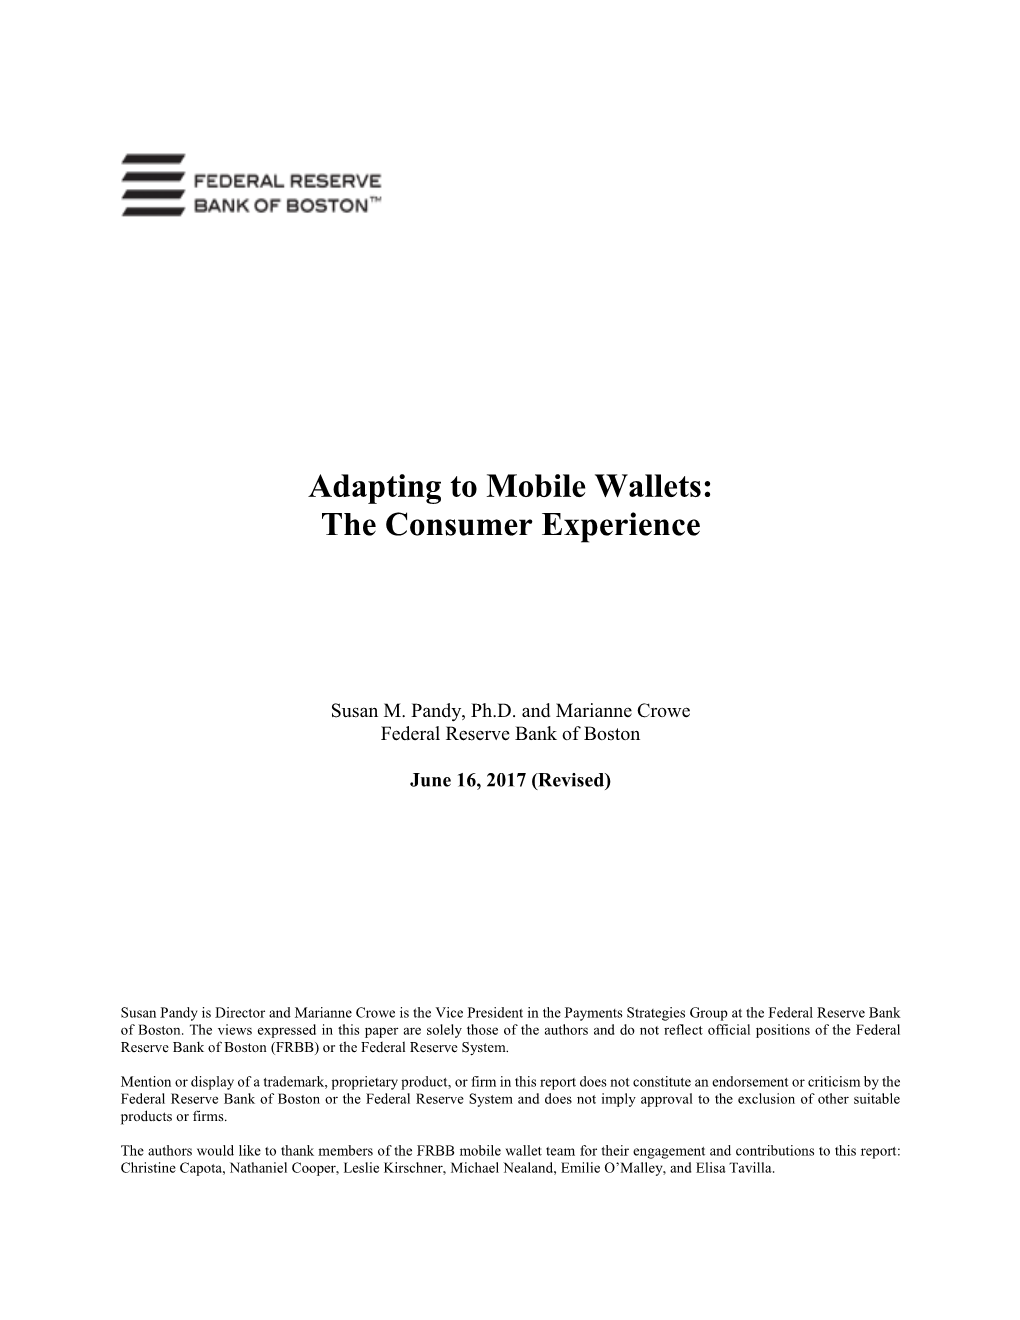 Adapting to Mobile Wallets: the Consumer Experience